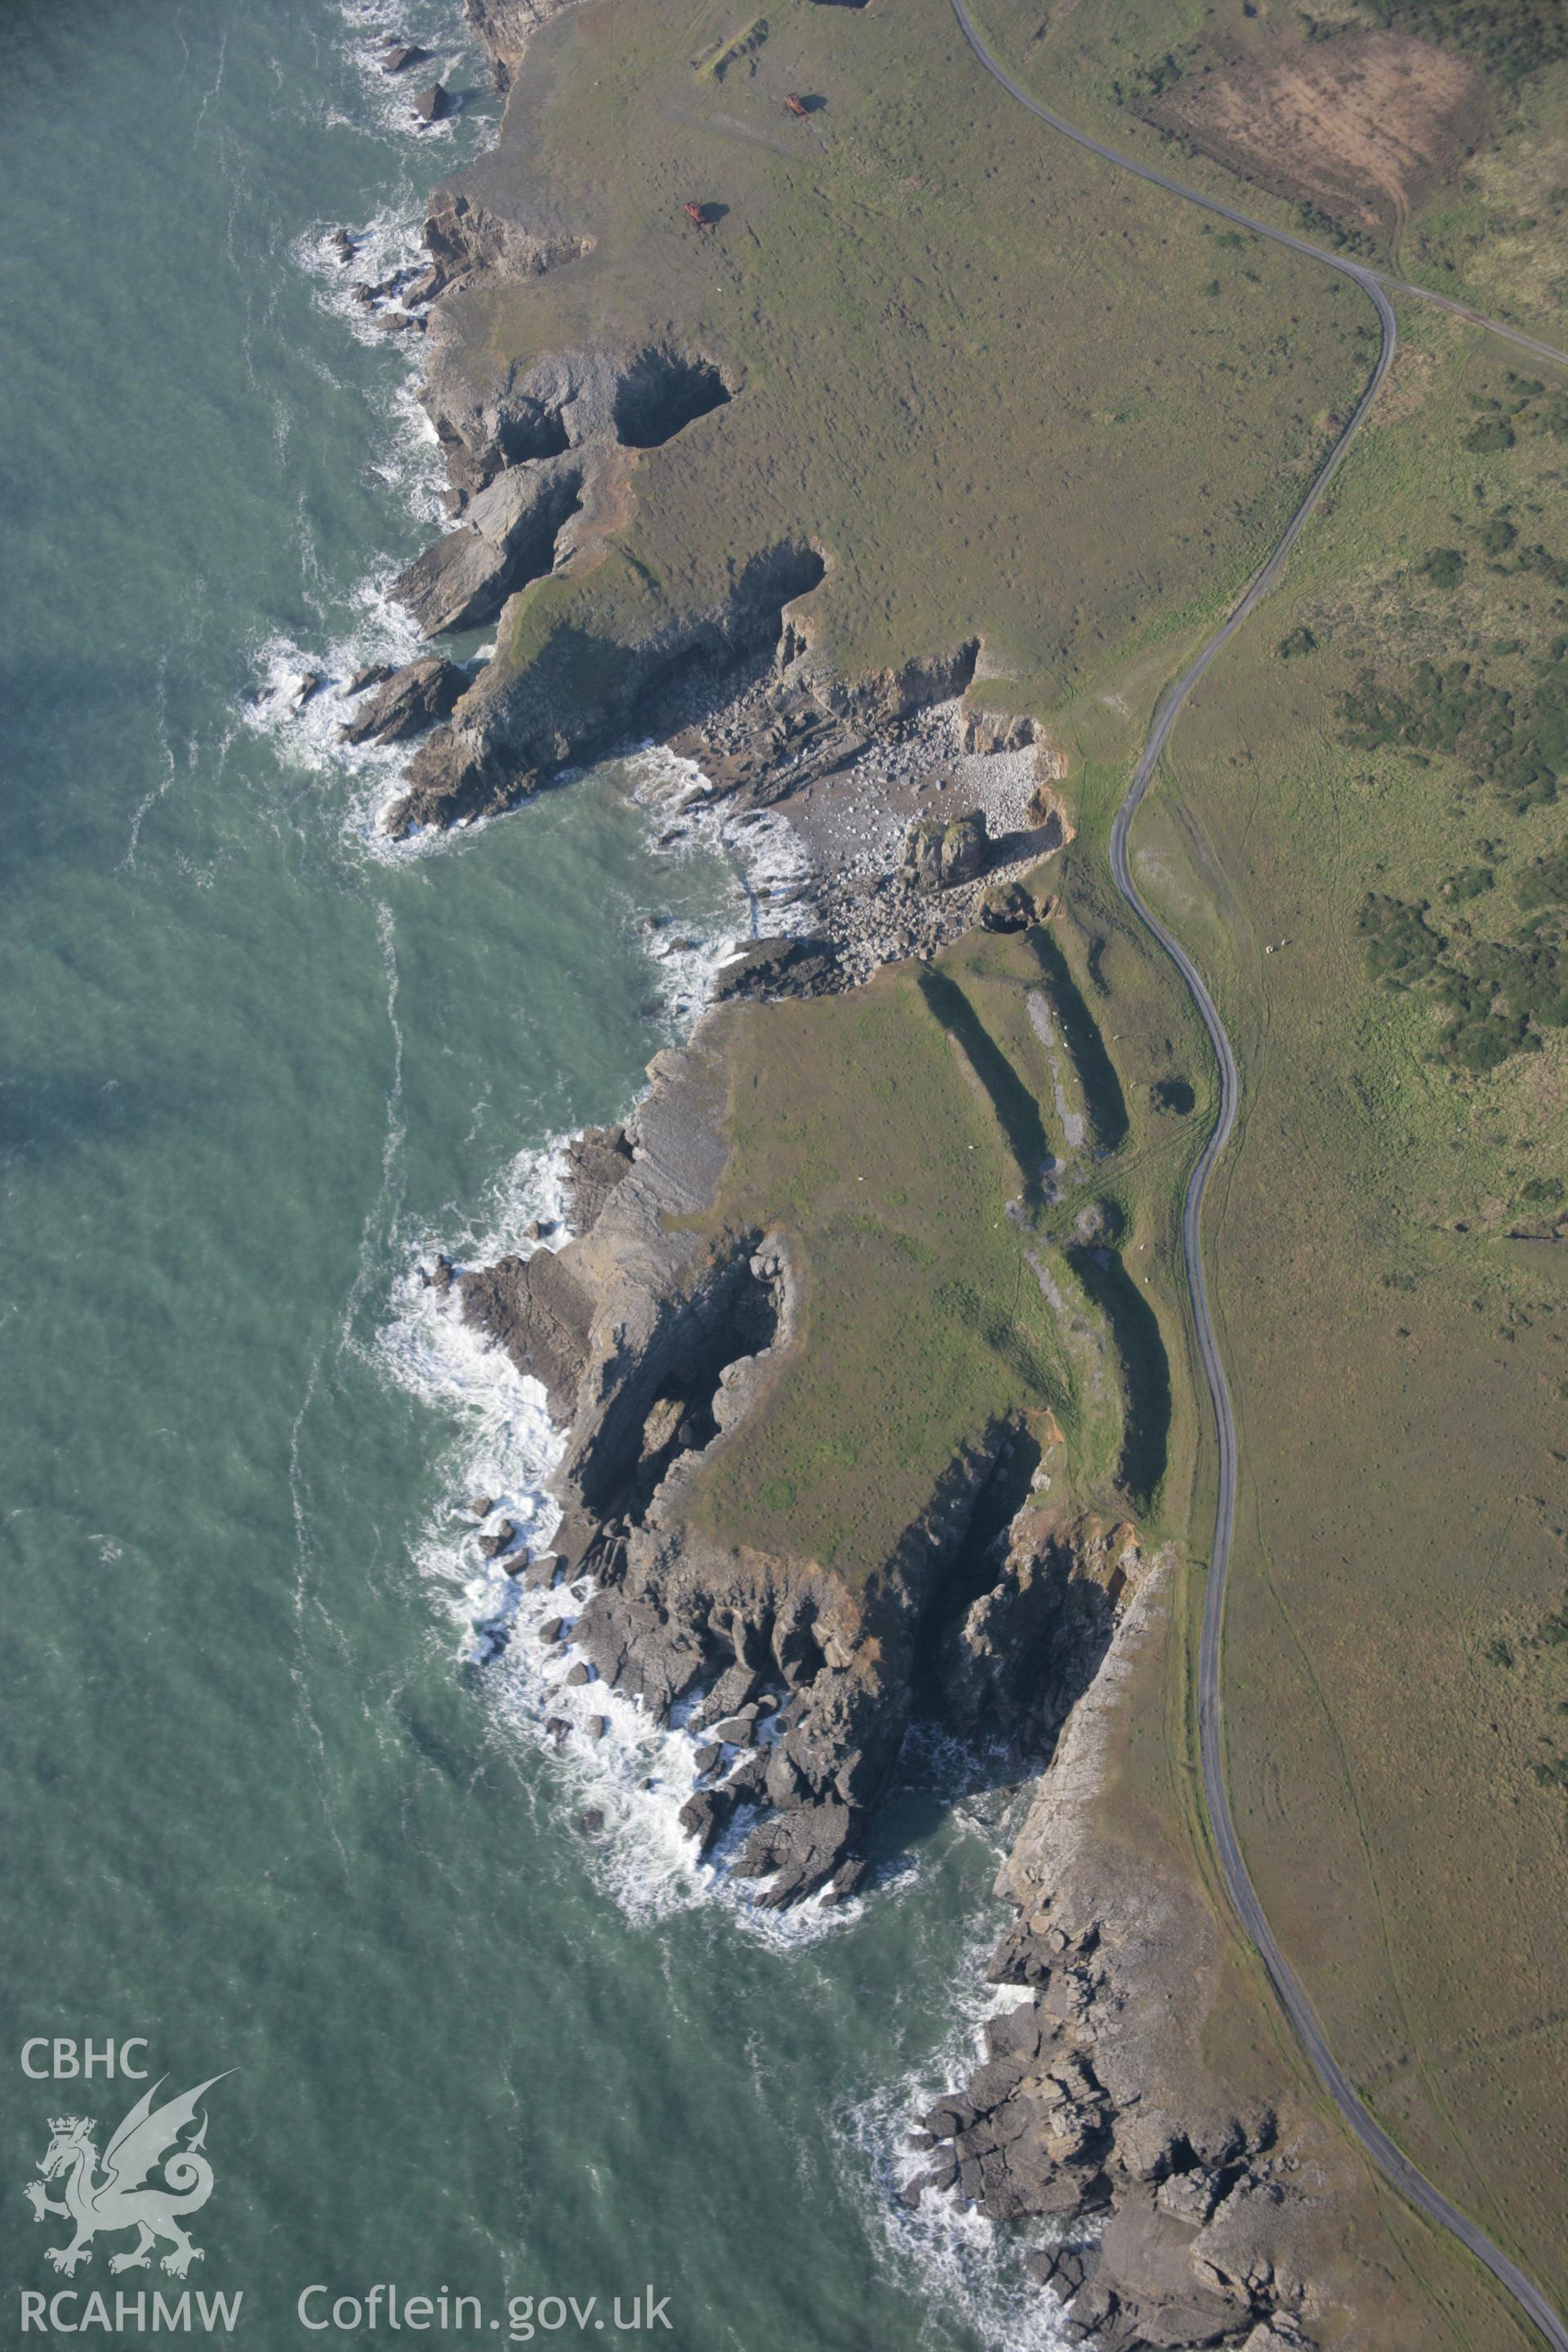 RCAHMW colour oblique aerial photograph of promontory fort at Linney Head Camp, Castlemartin, viewed from the east. Taken on 19 November 2005 by Toby Driver